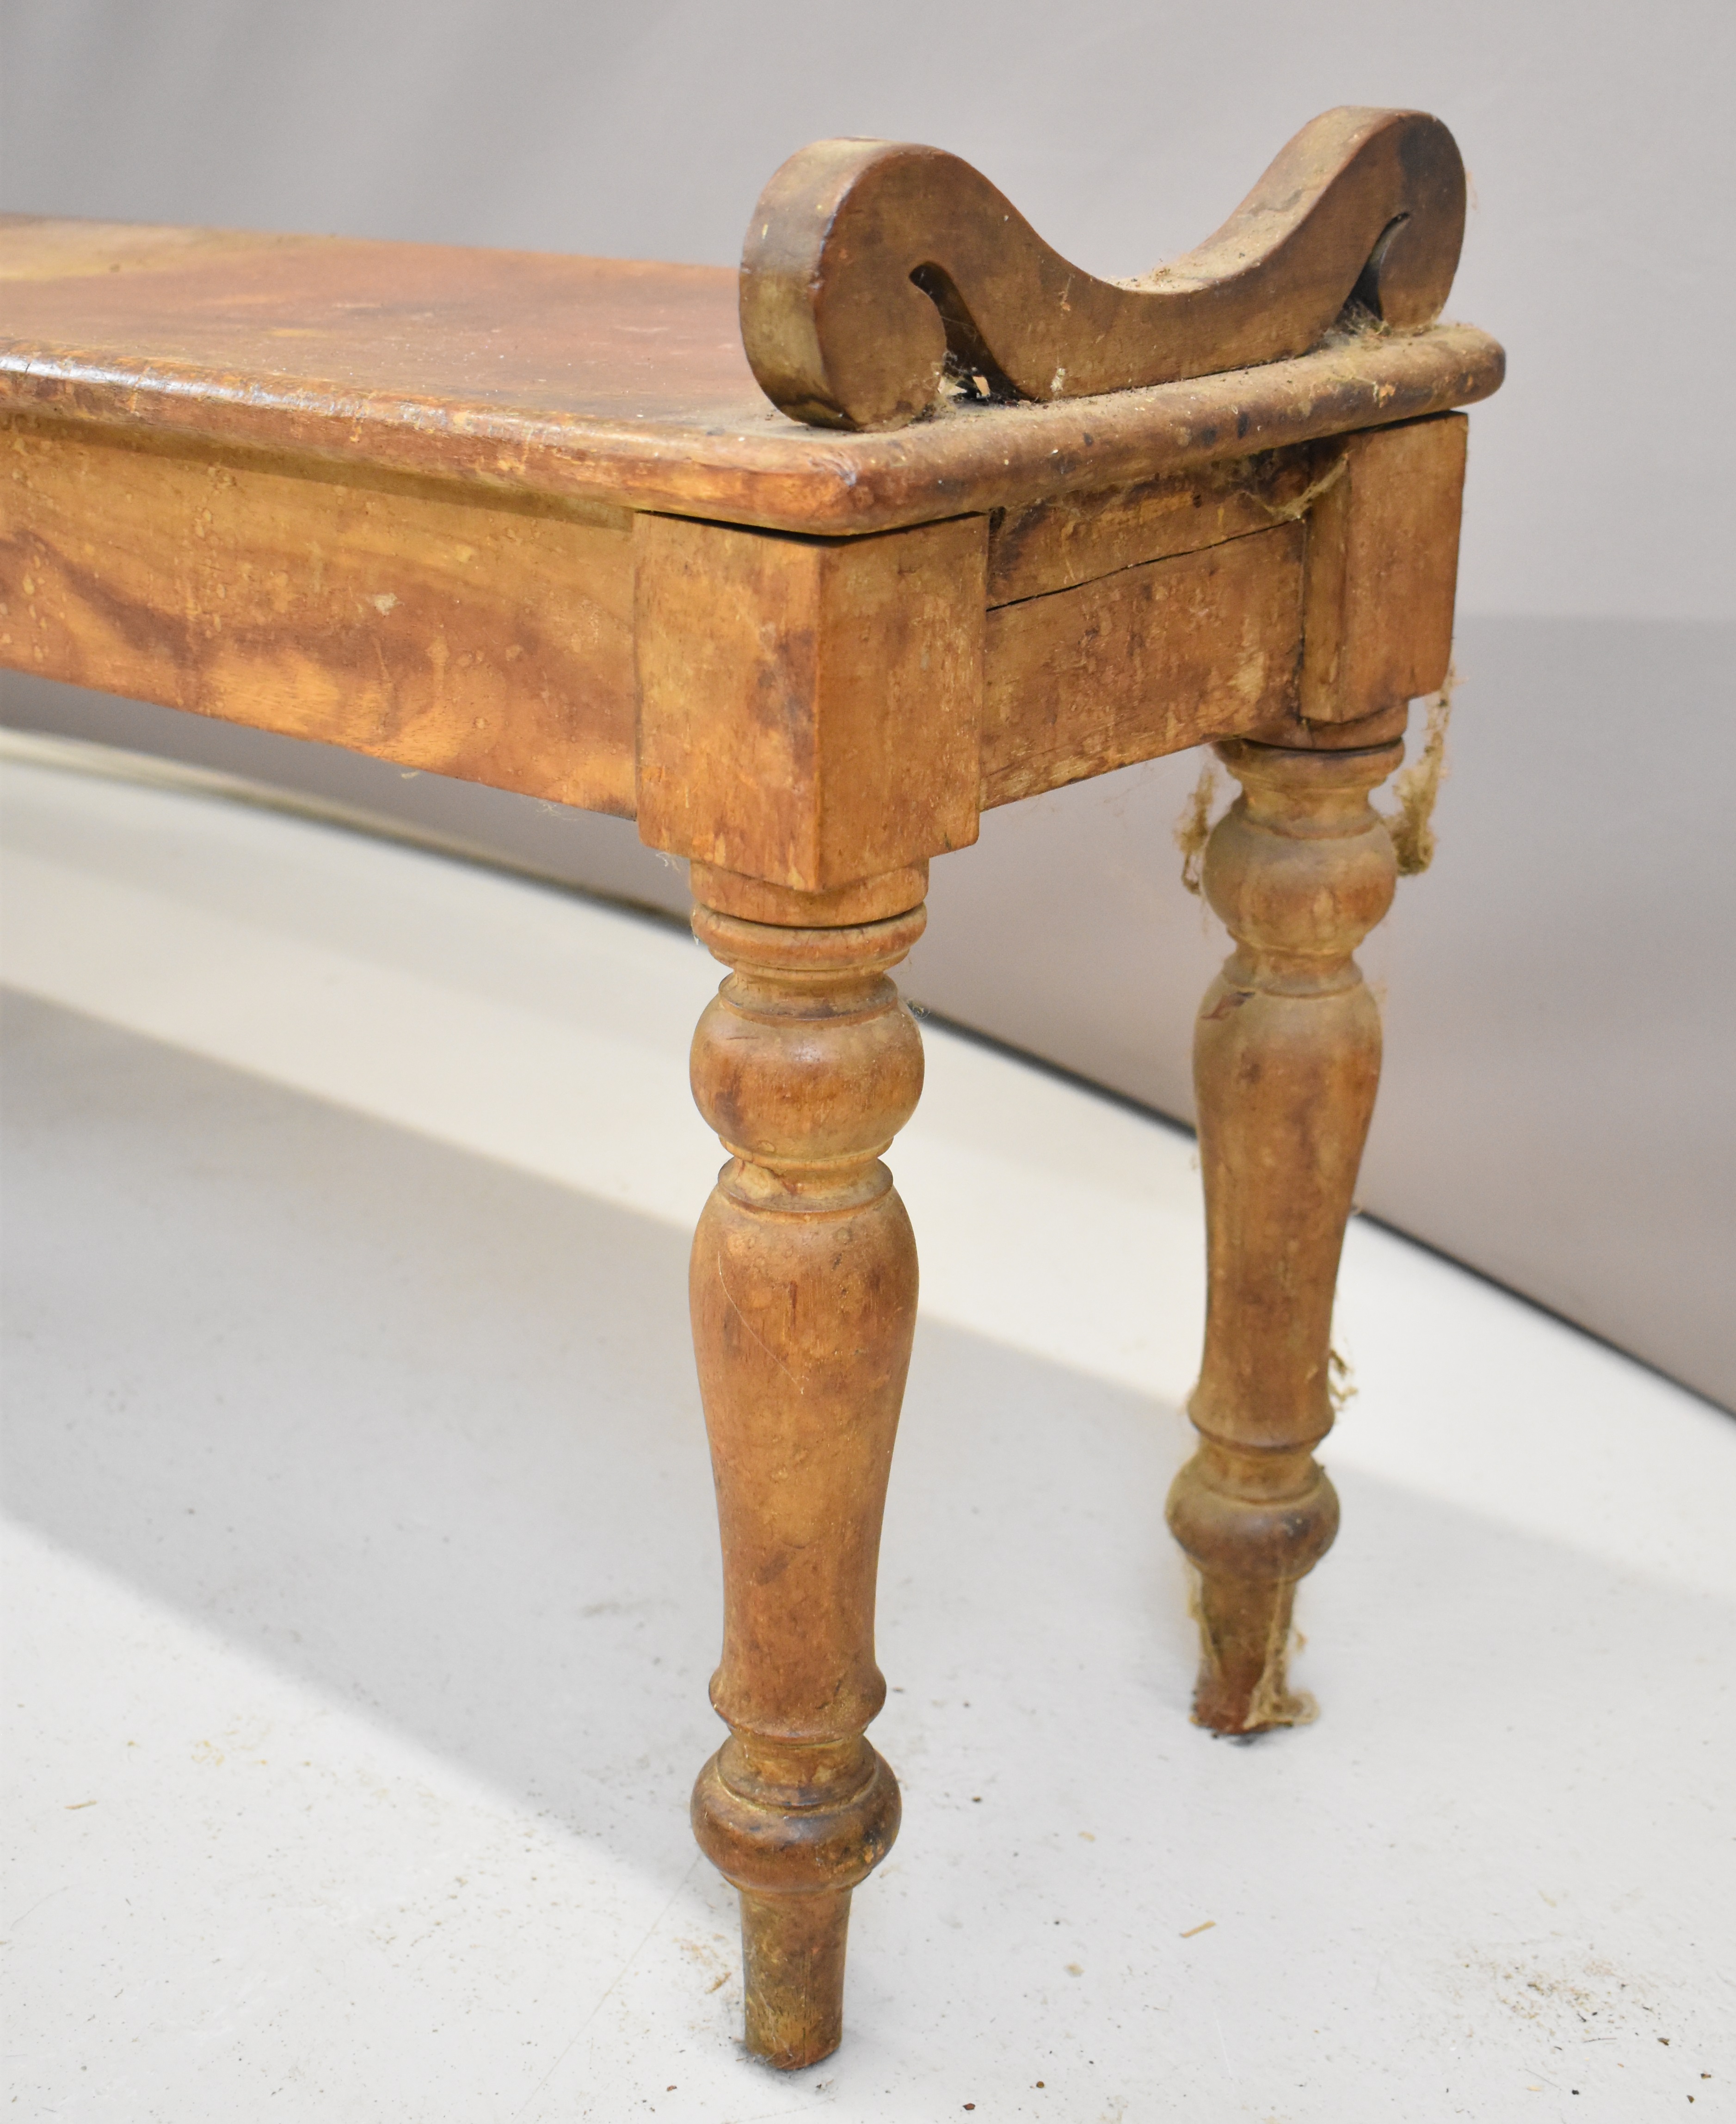 19thC ash window seat or low bench with scroll ends, raised on six turned legs, W193 x D30 x H46cm - Image 4 of 4